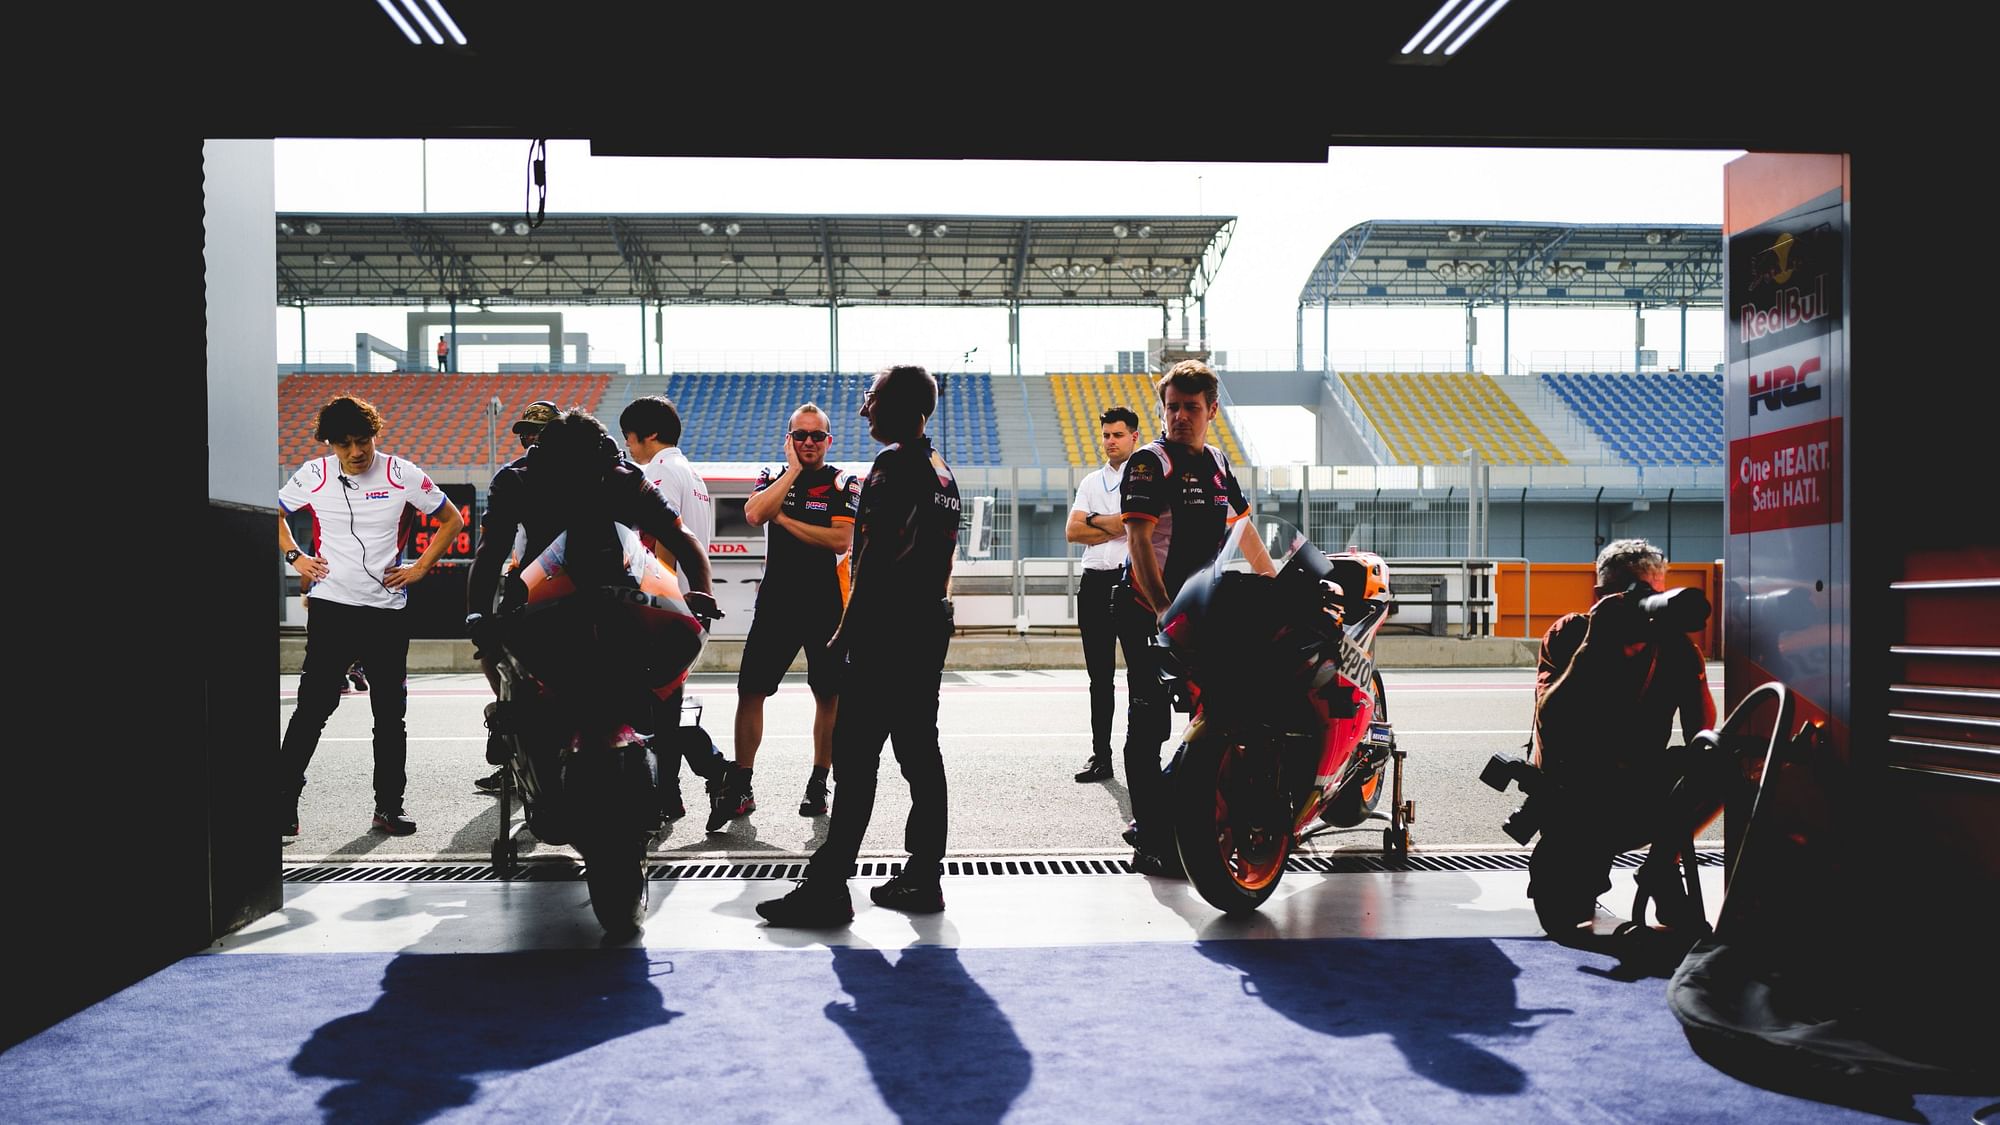 The opening race of the MotoGP season in Qatar was scheduled to take place on 8 March.